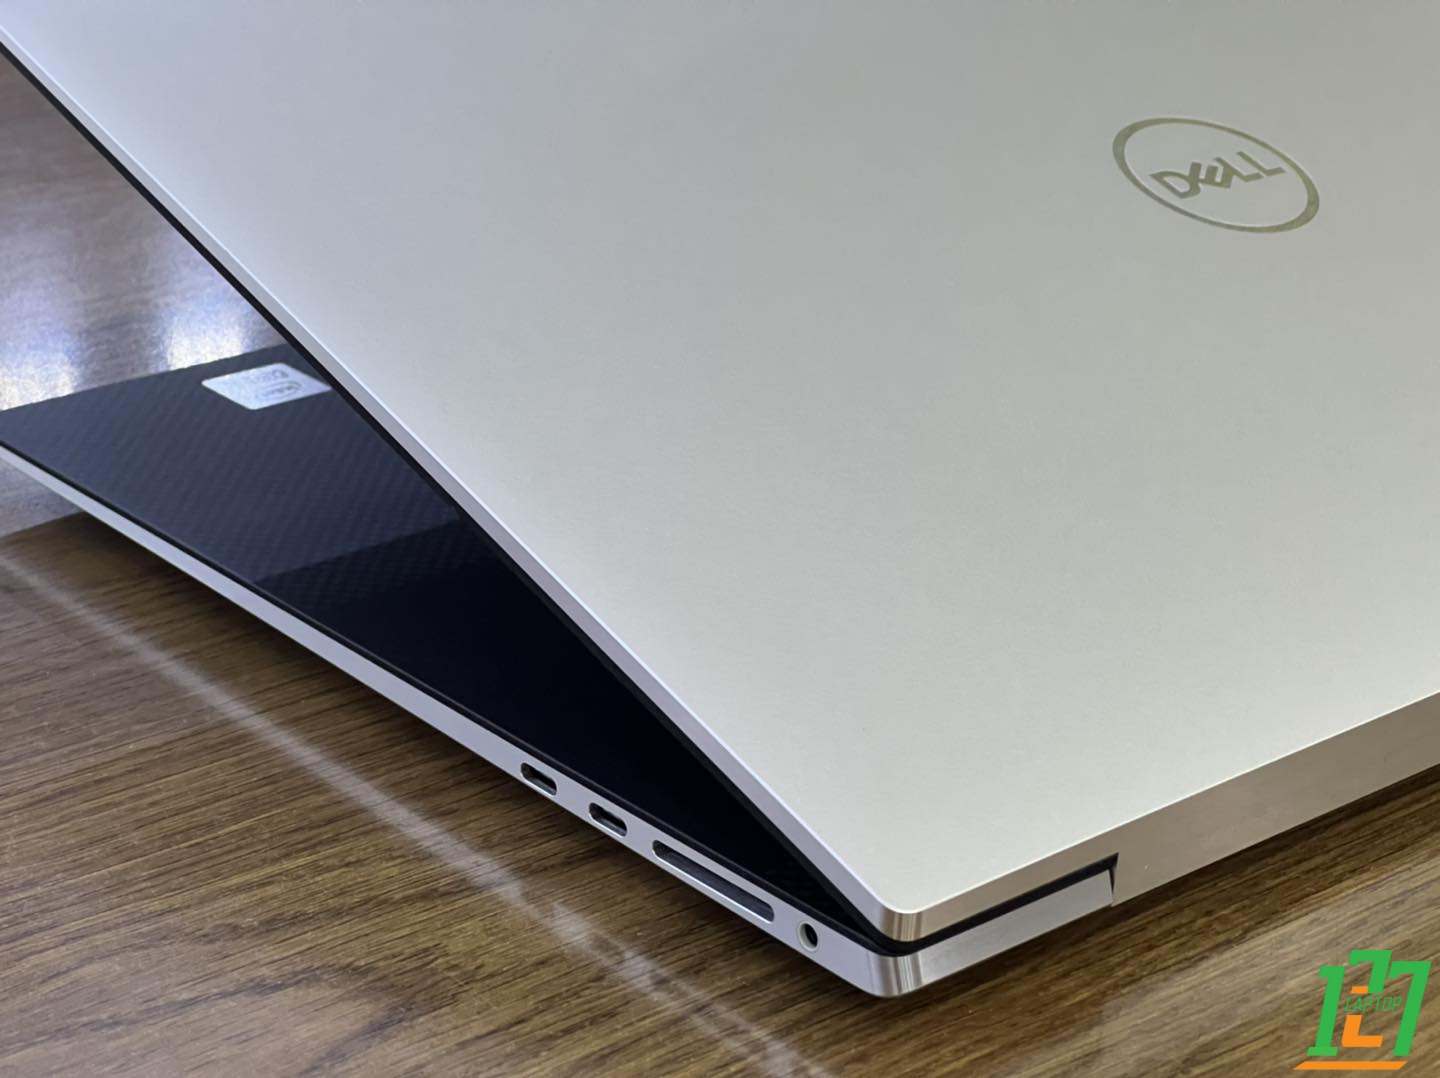 Dell XPS 17 9700